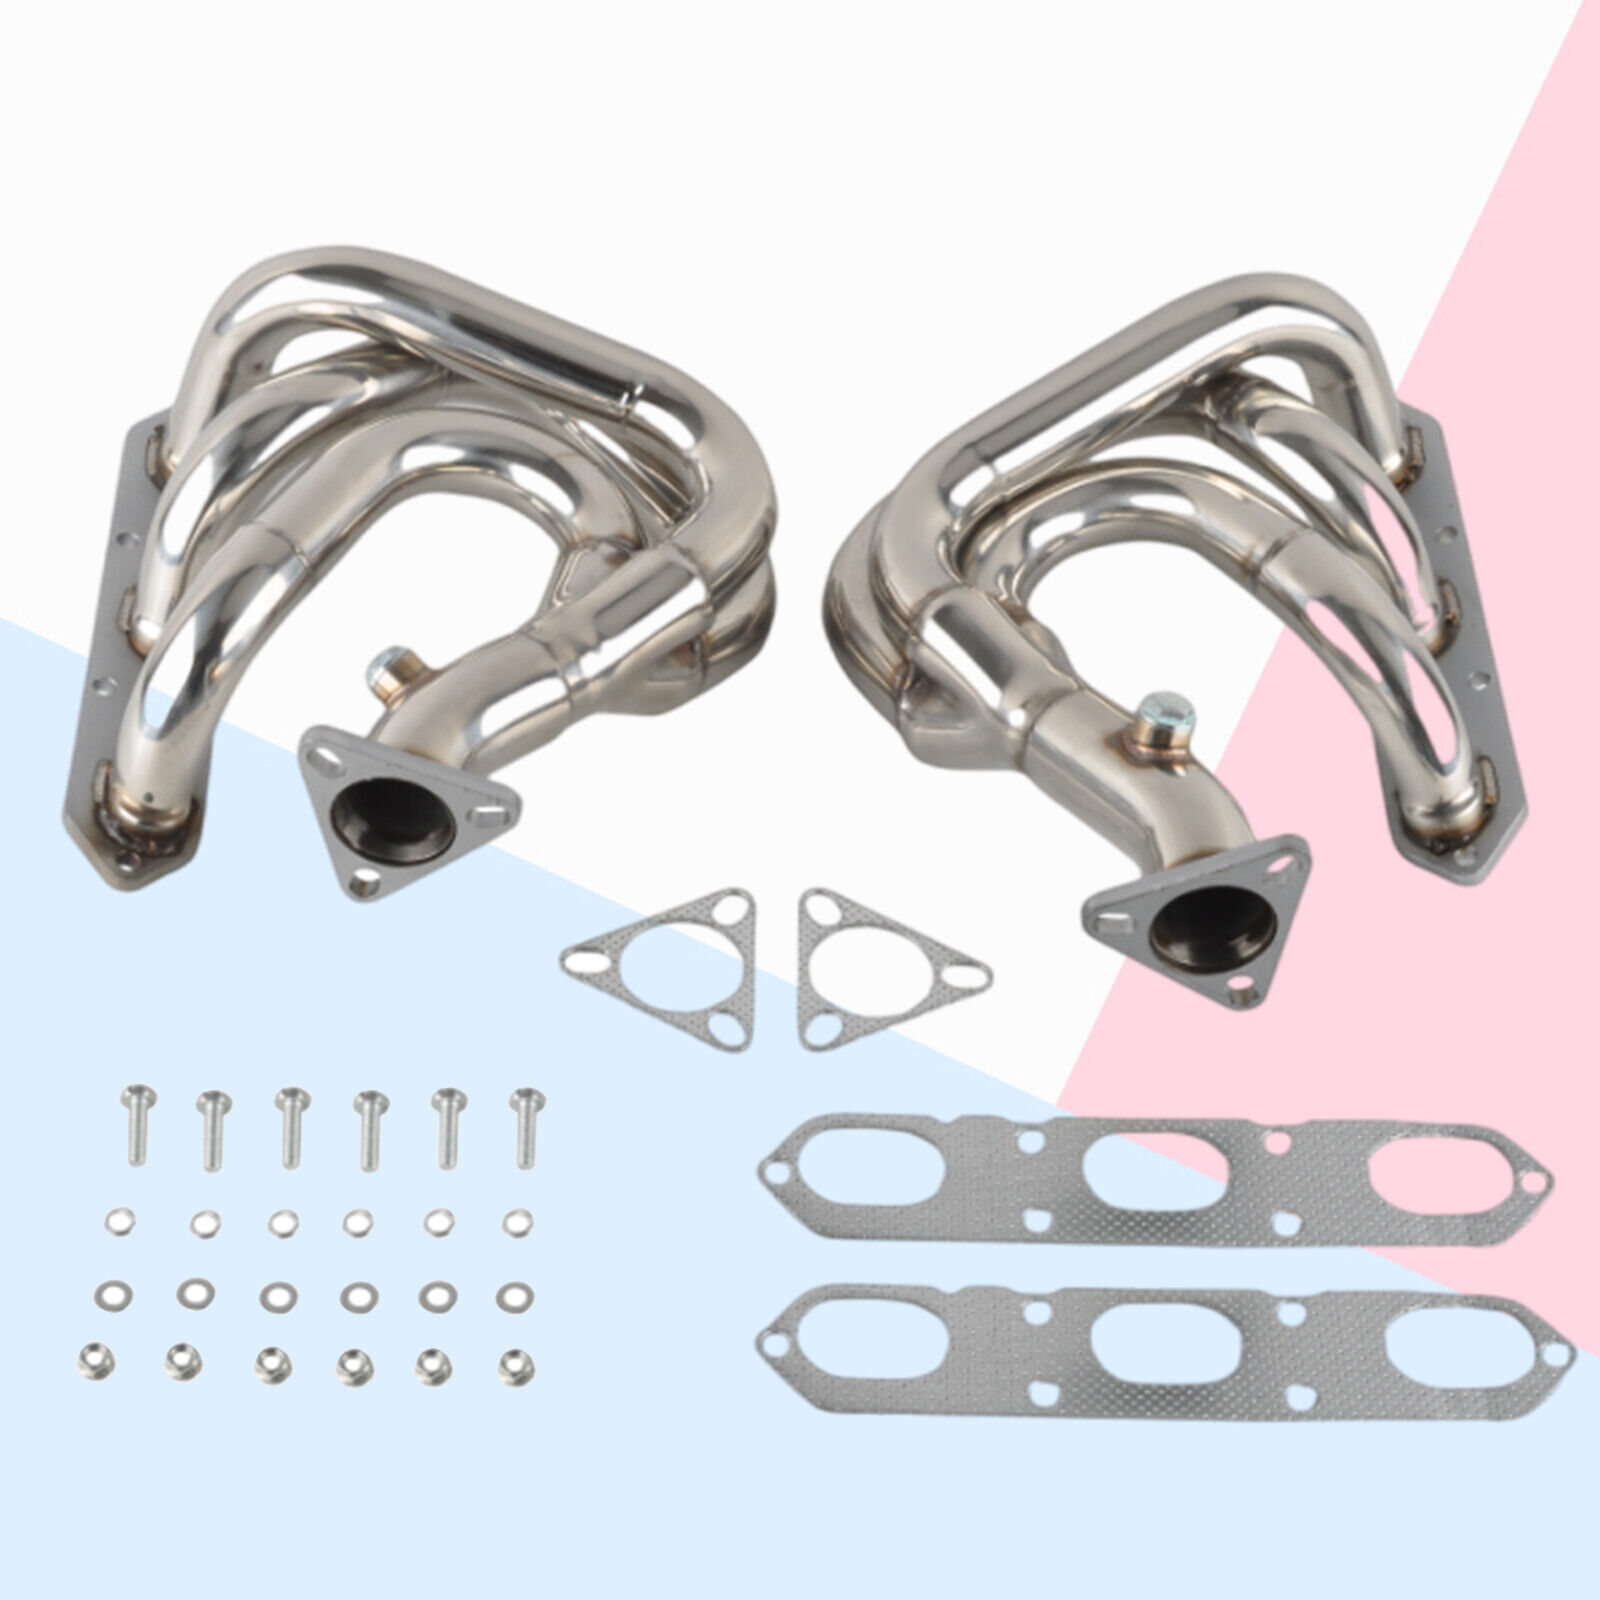 SS Stainless Steel Headers Fits Porsche Boxster 986 1997-2004 2.5L 2.7L 3.2LZI